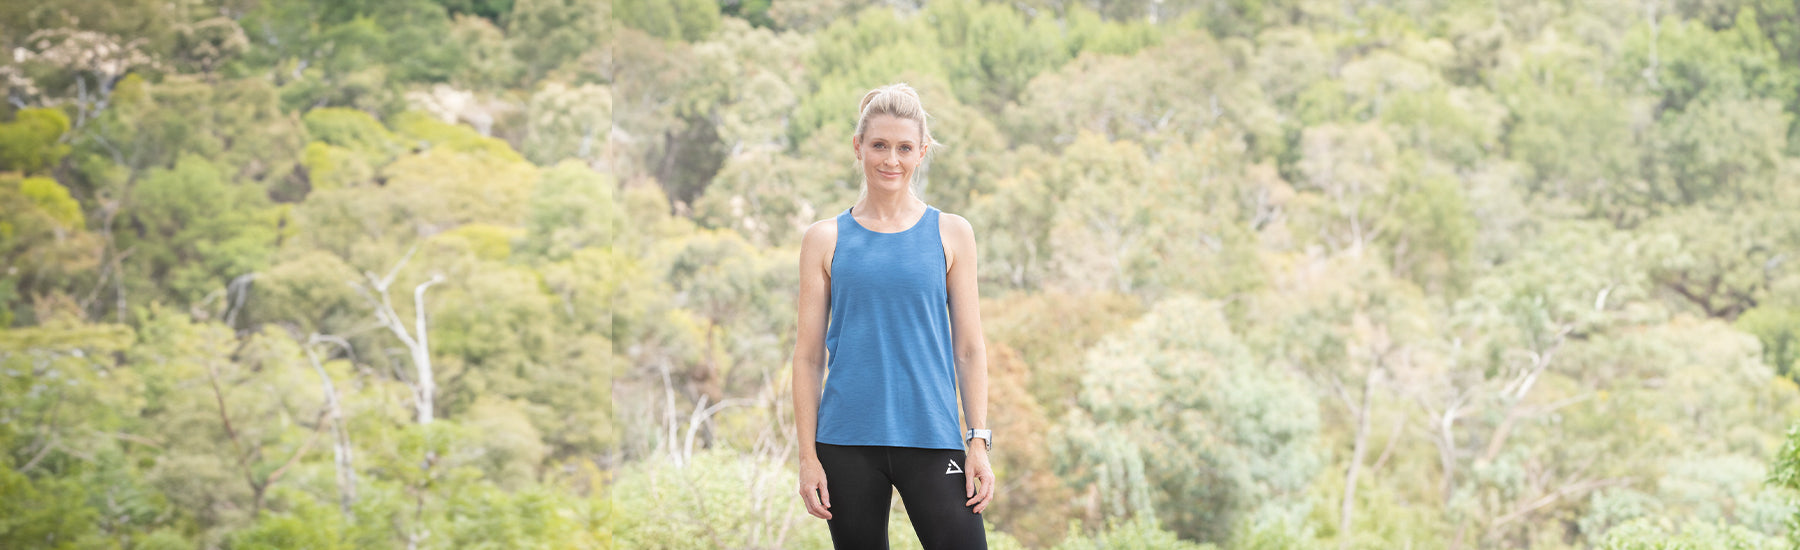 Women's tees and tanks for wearing outdoors and hitting the trails 